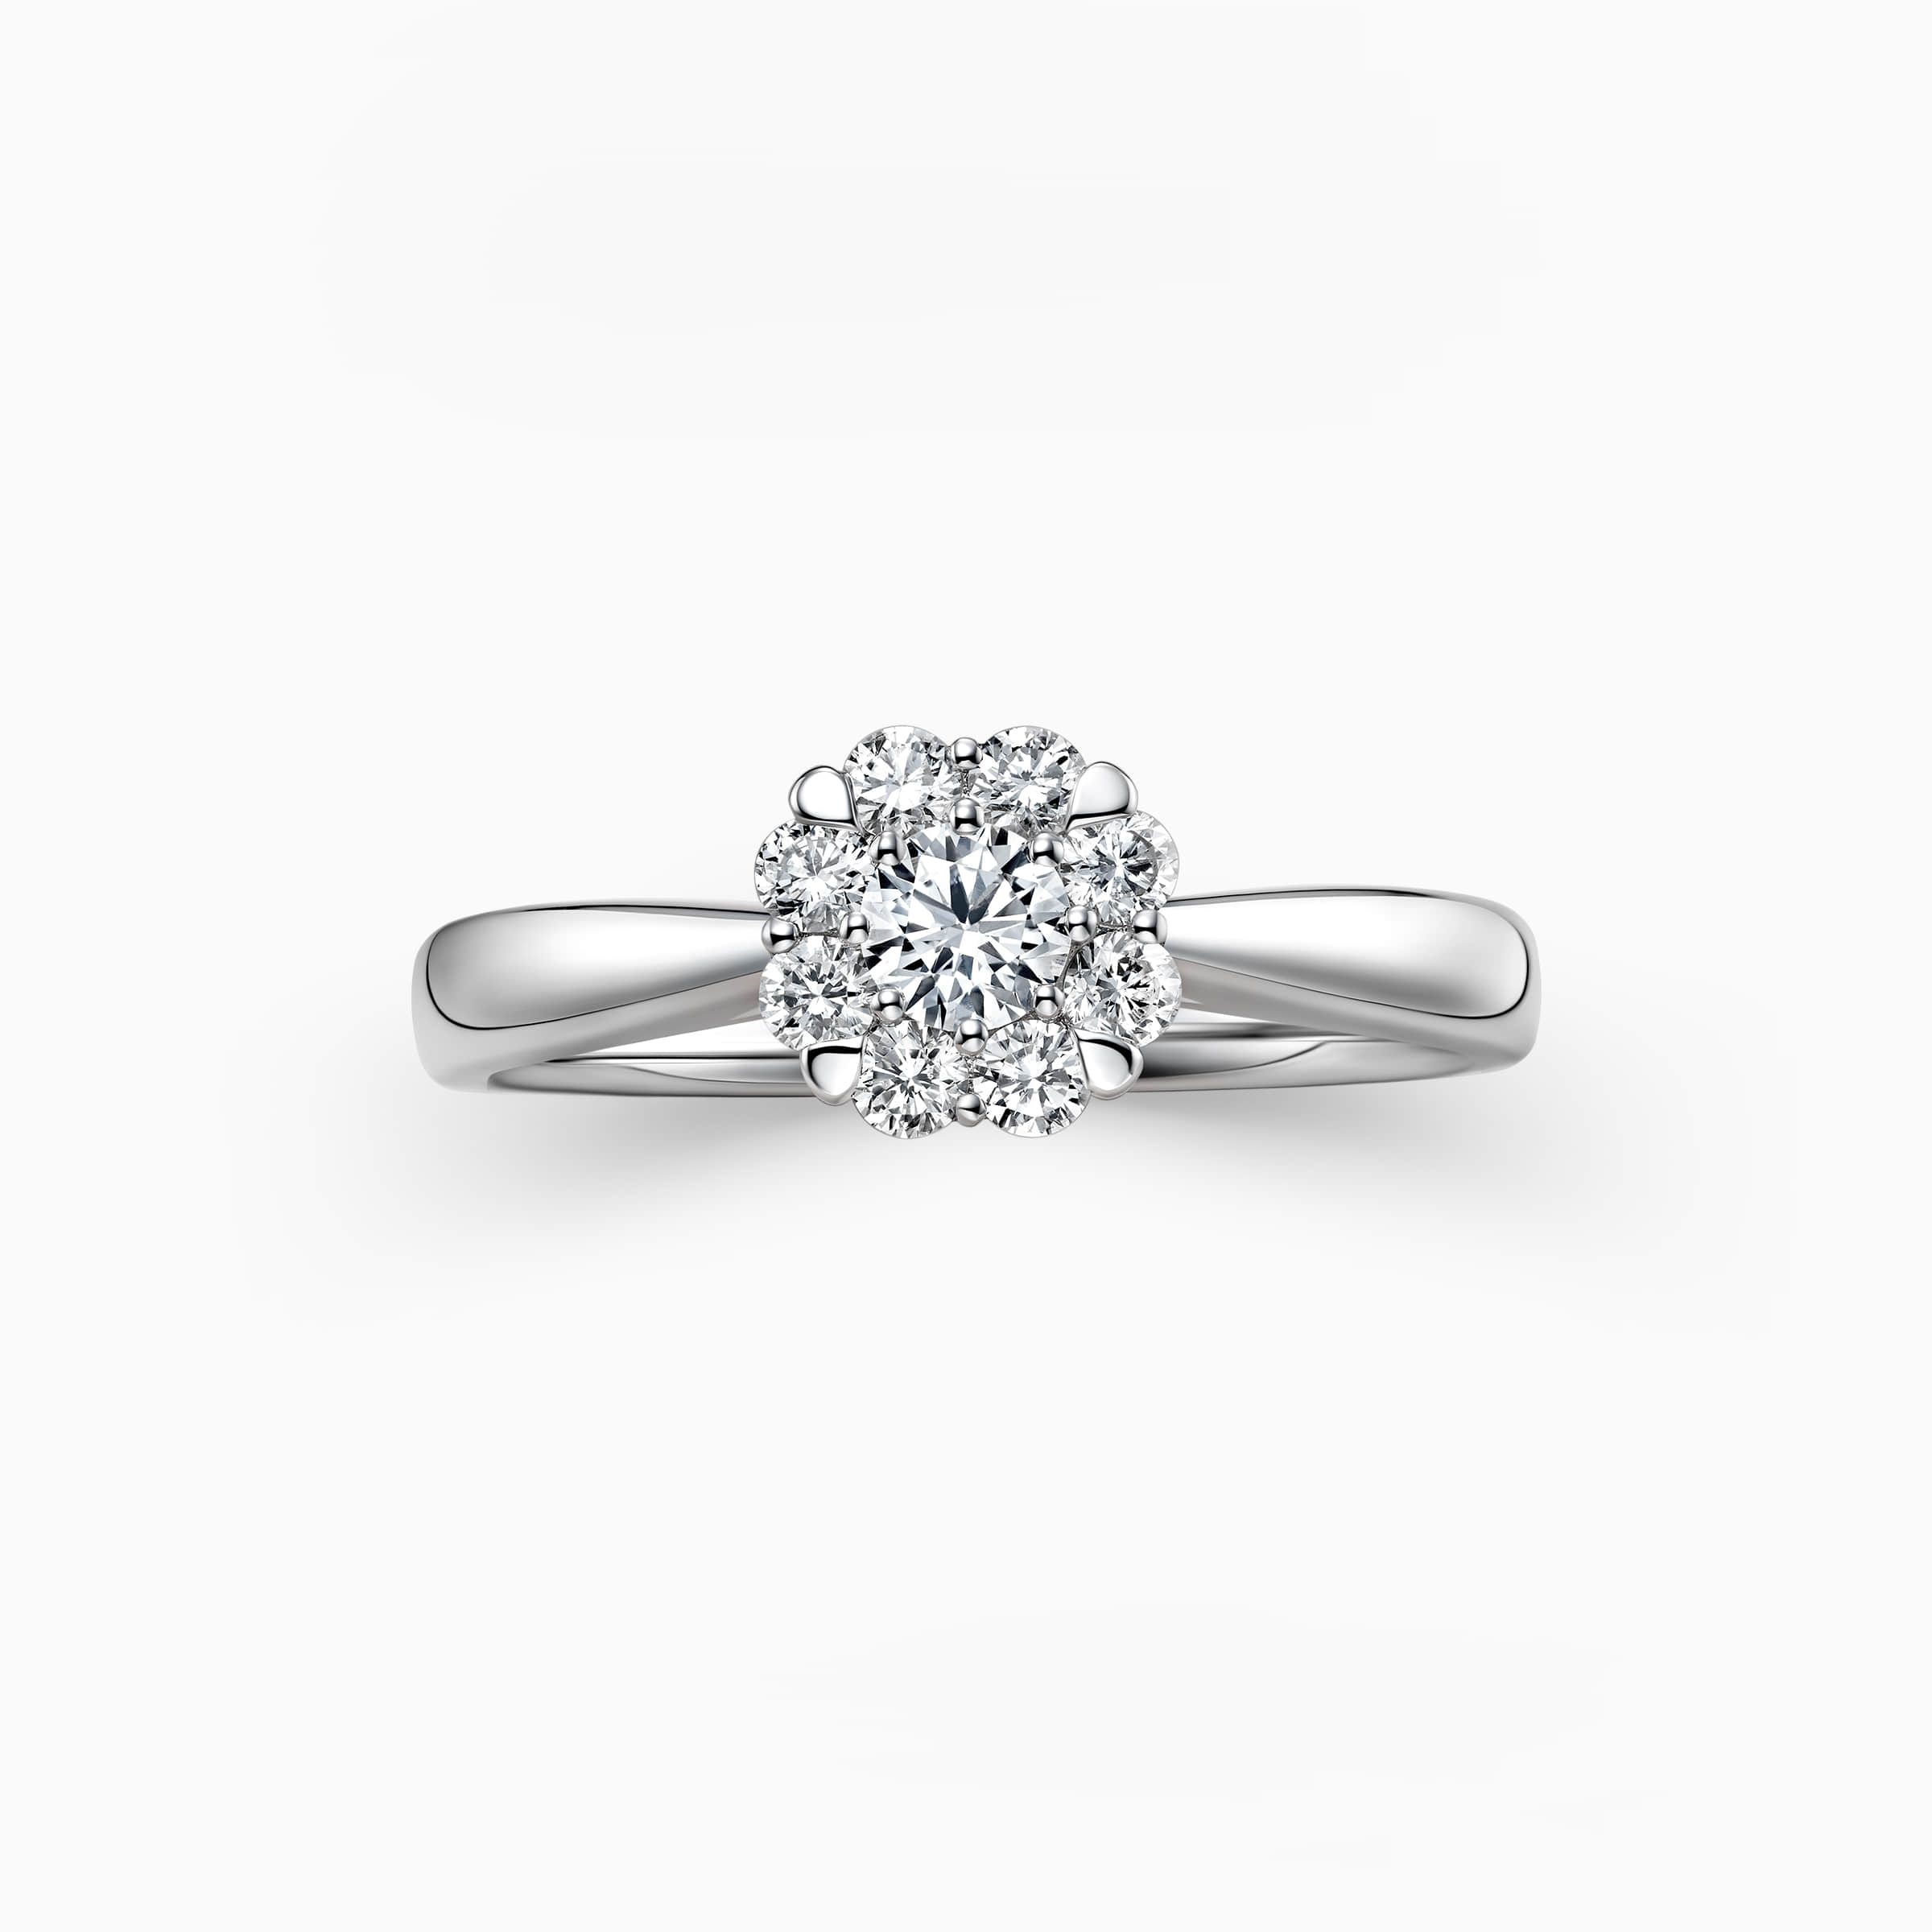 Darry Ring diamond halo promise ring front view